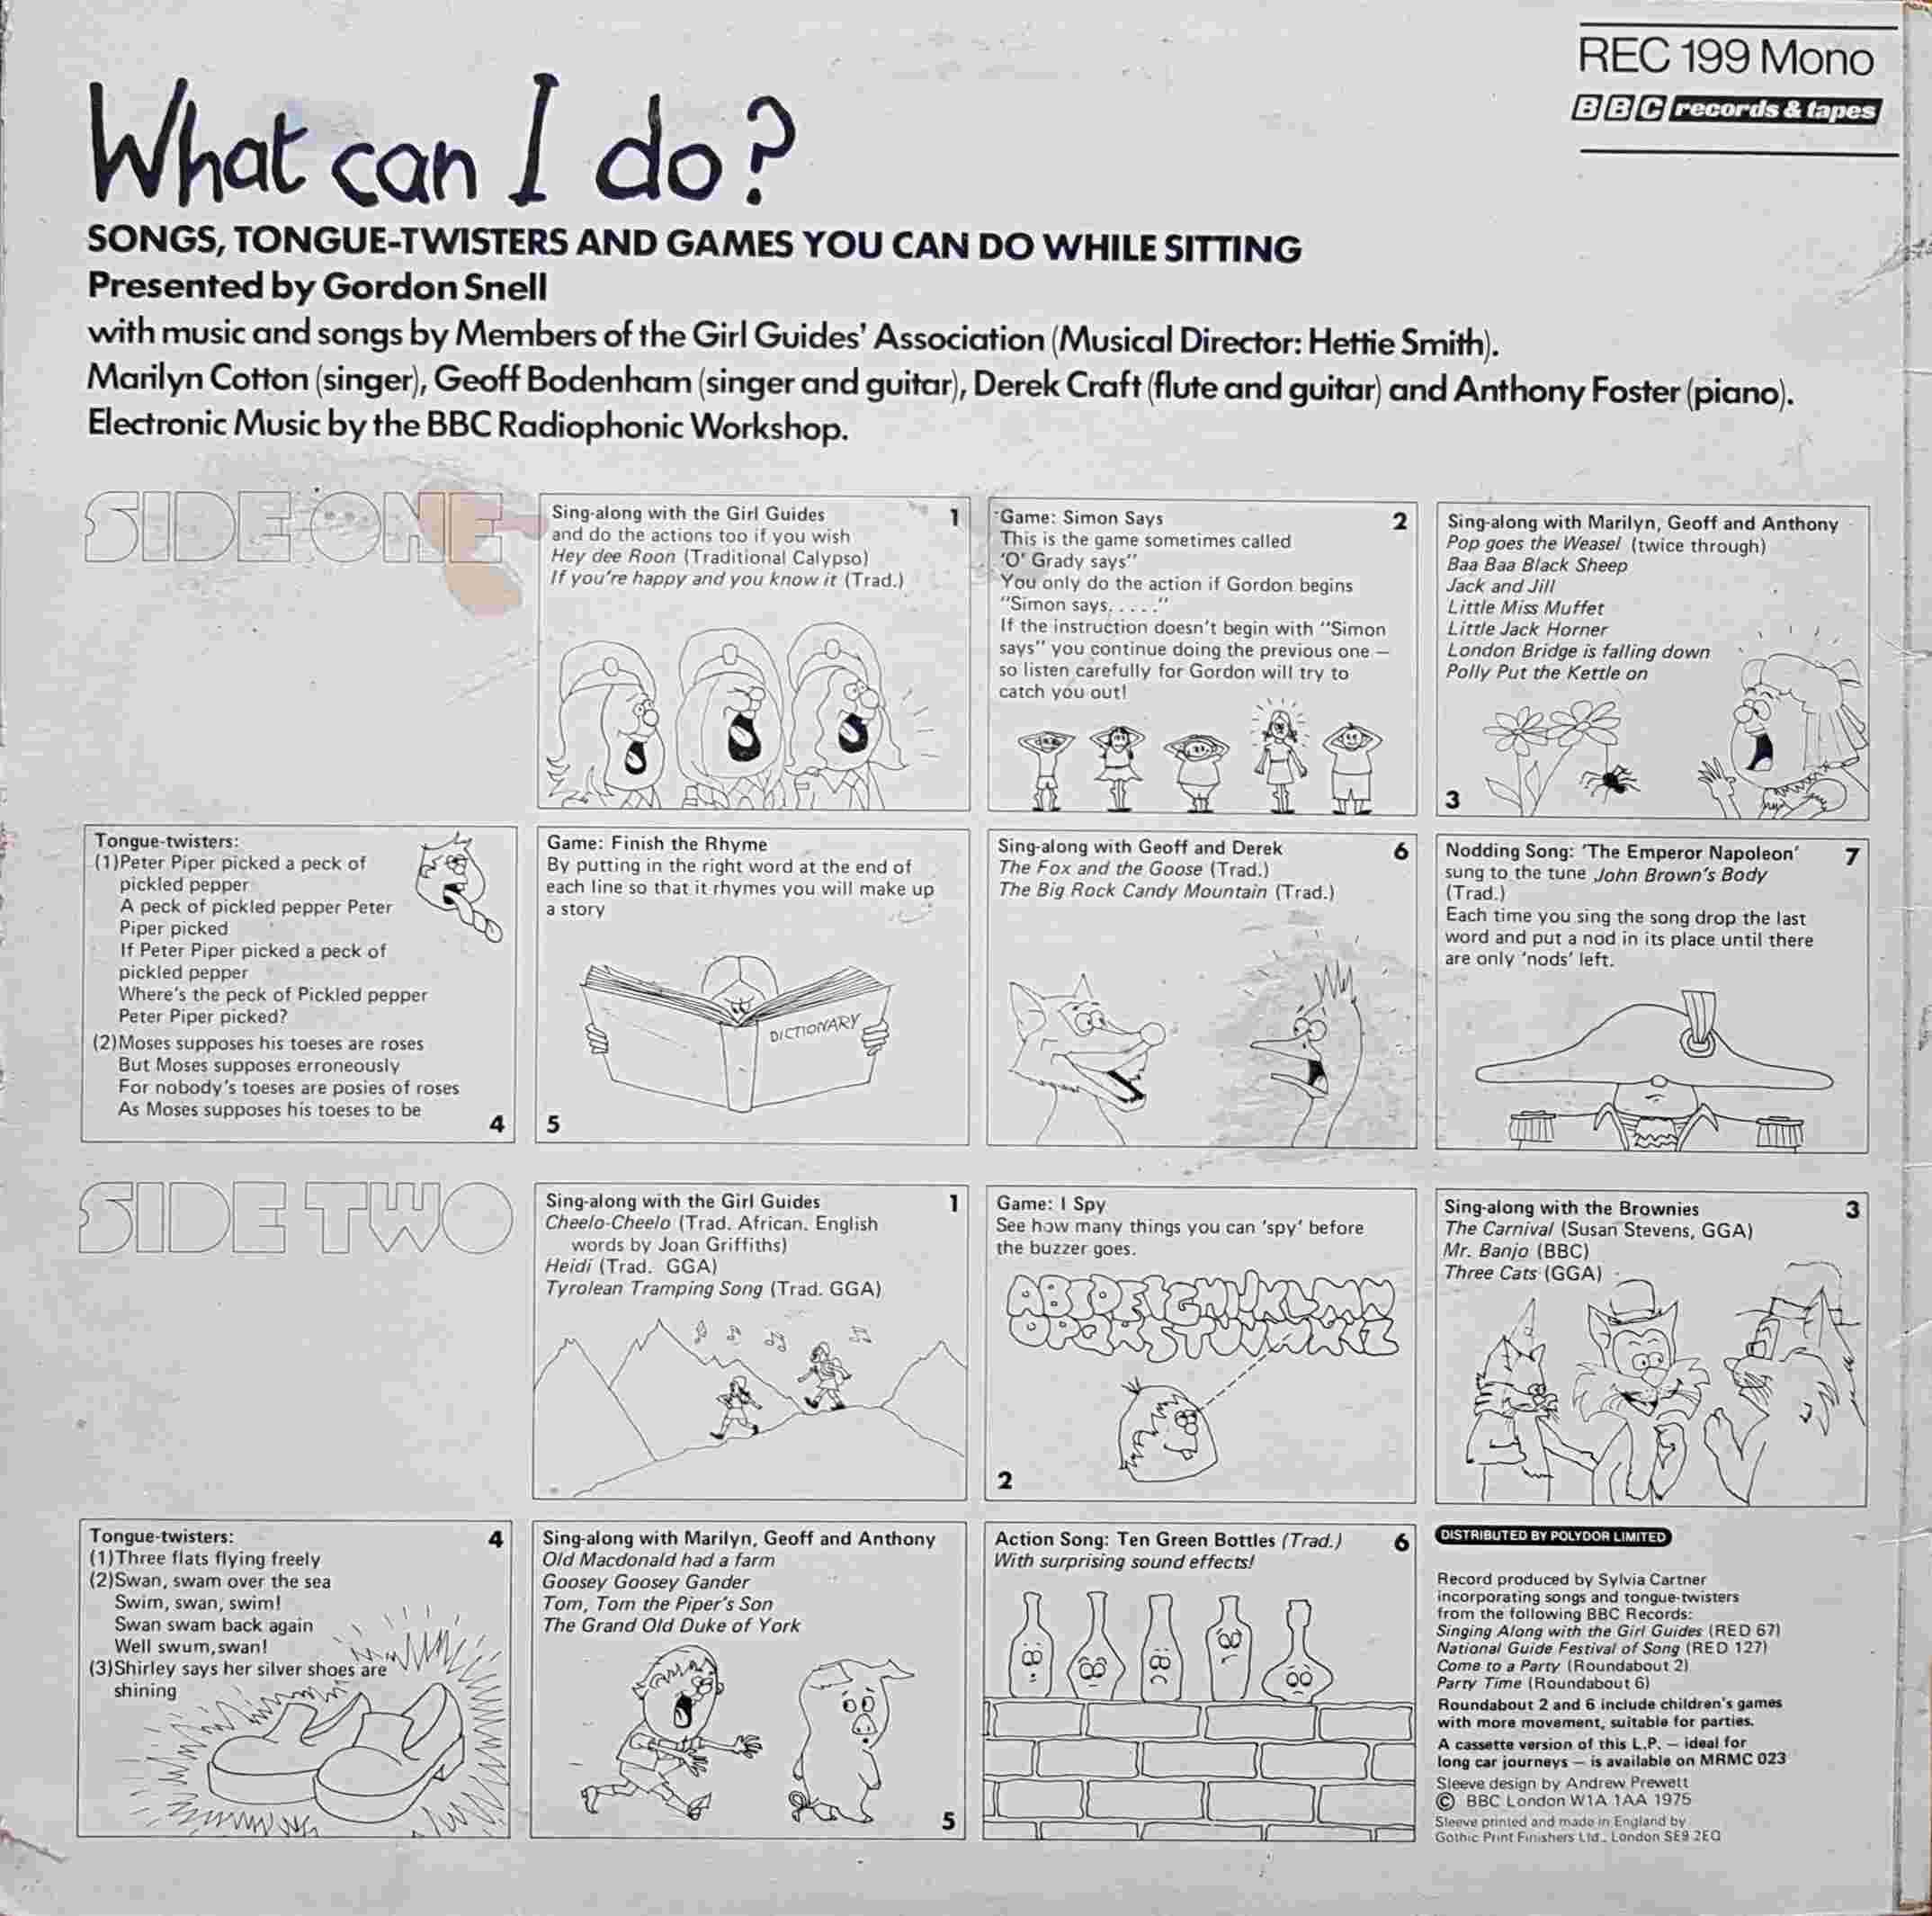 Picture of REC 199 What can I do ? by artist Various from the BBC records and Tapes library